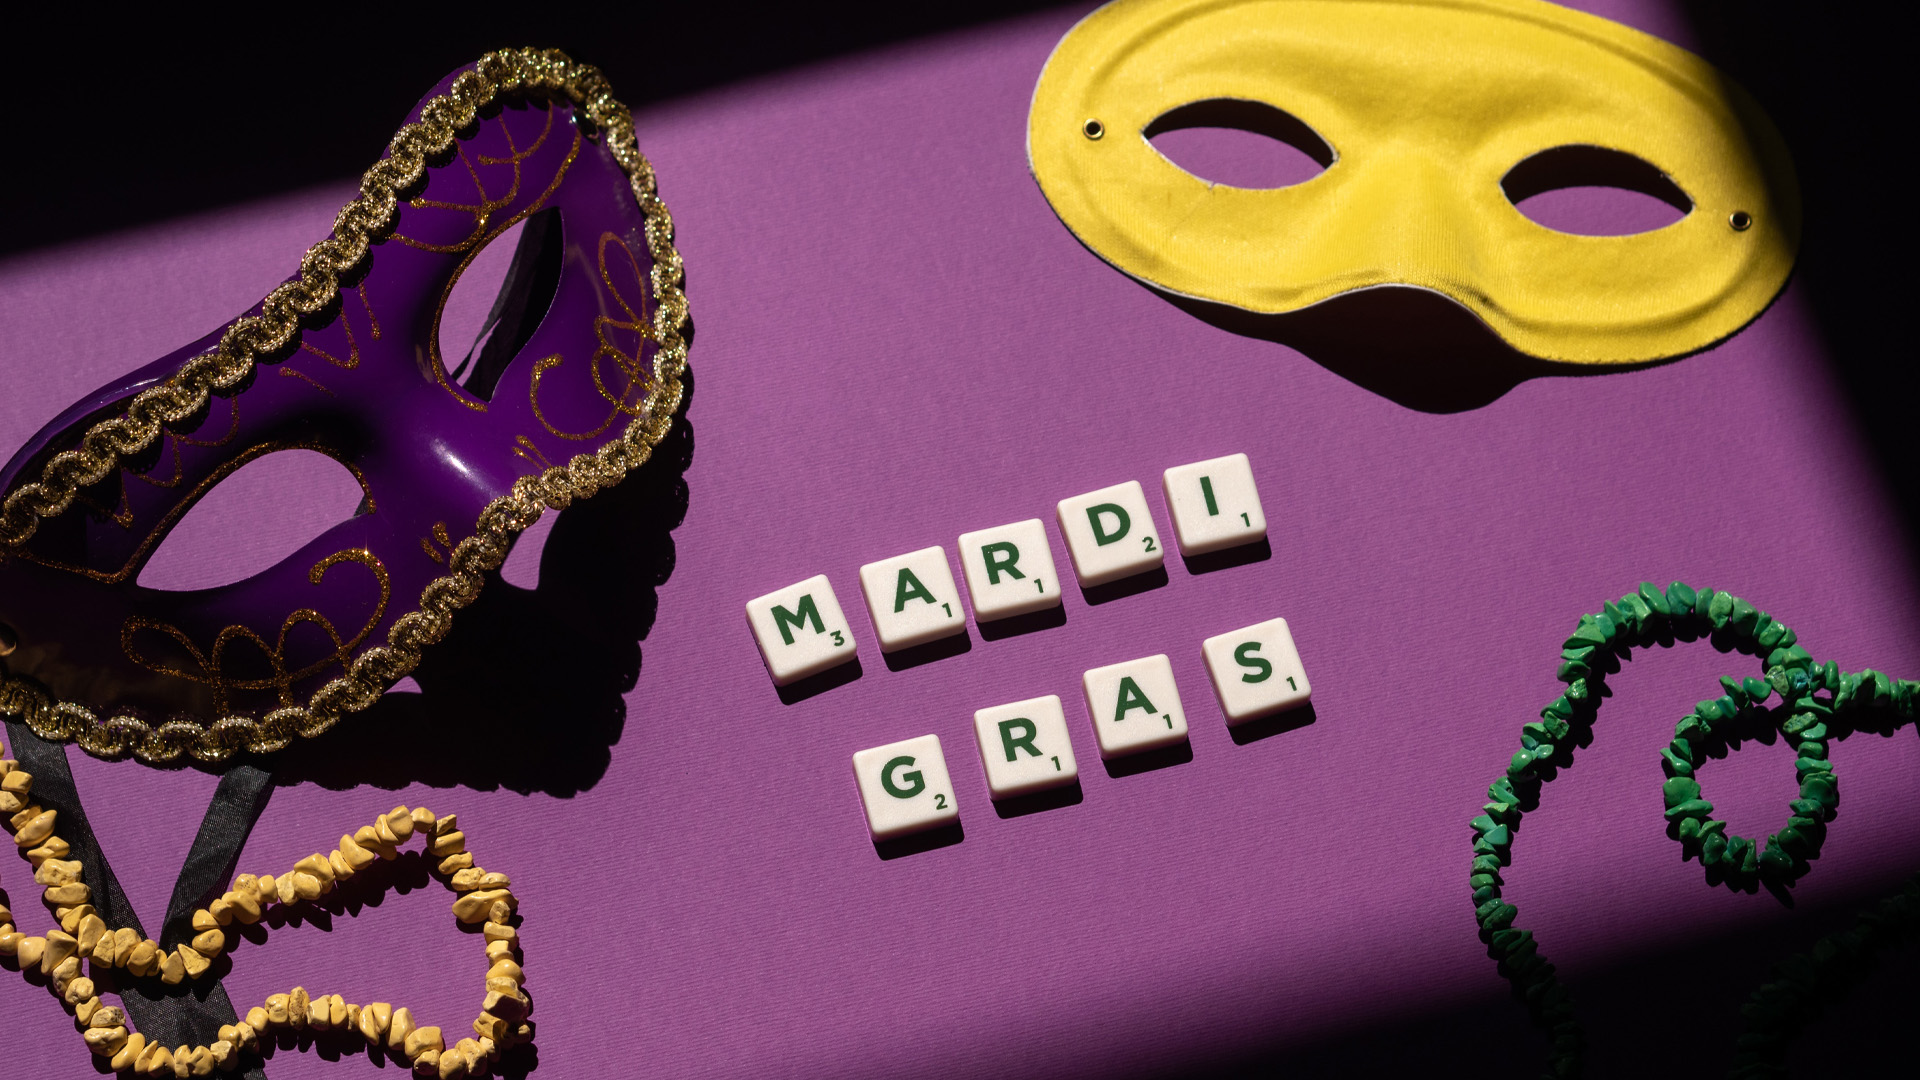 Purple background, with green and yellow stoned necklacesspread across the bottom of the graphic. Purple and yellow mask are spread across the top of the image. Scramble letters spelling our "Mardi Gras" in the center of the graphic.